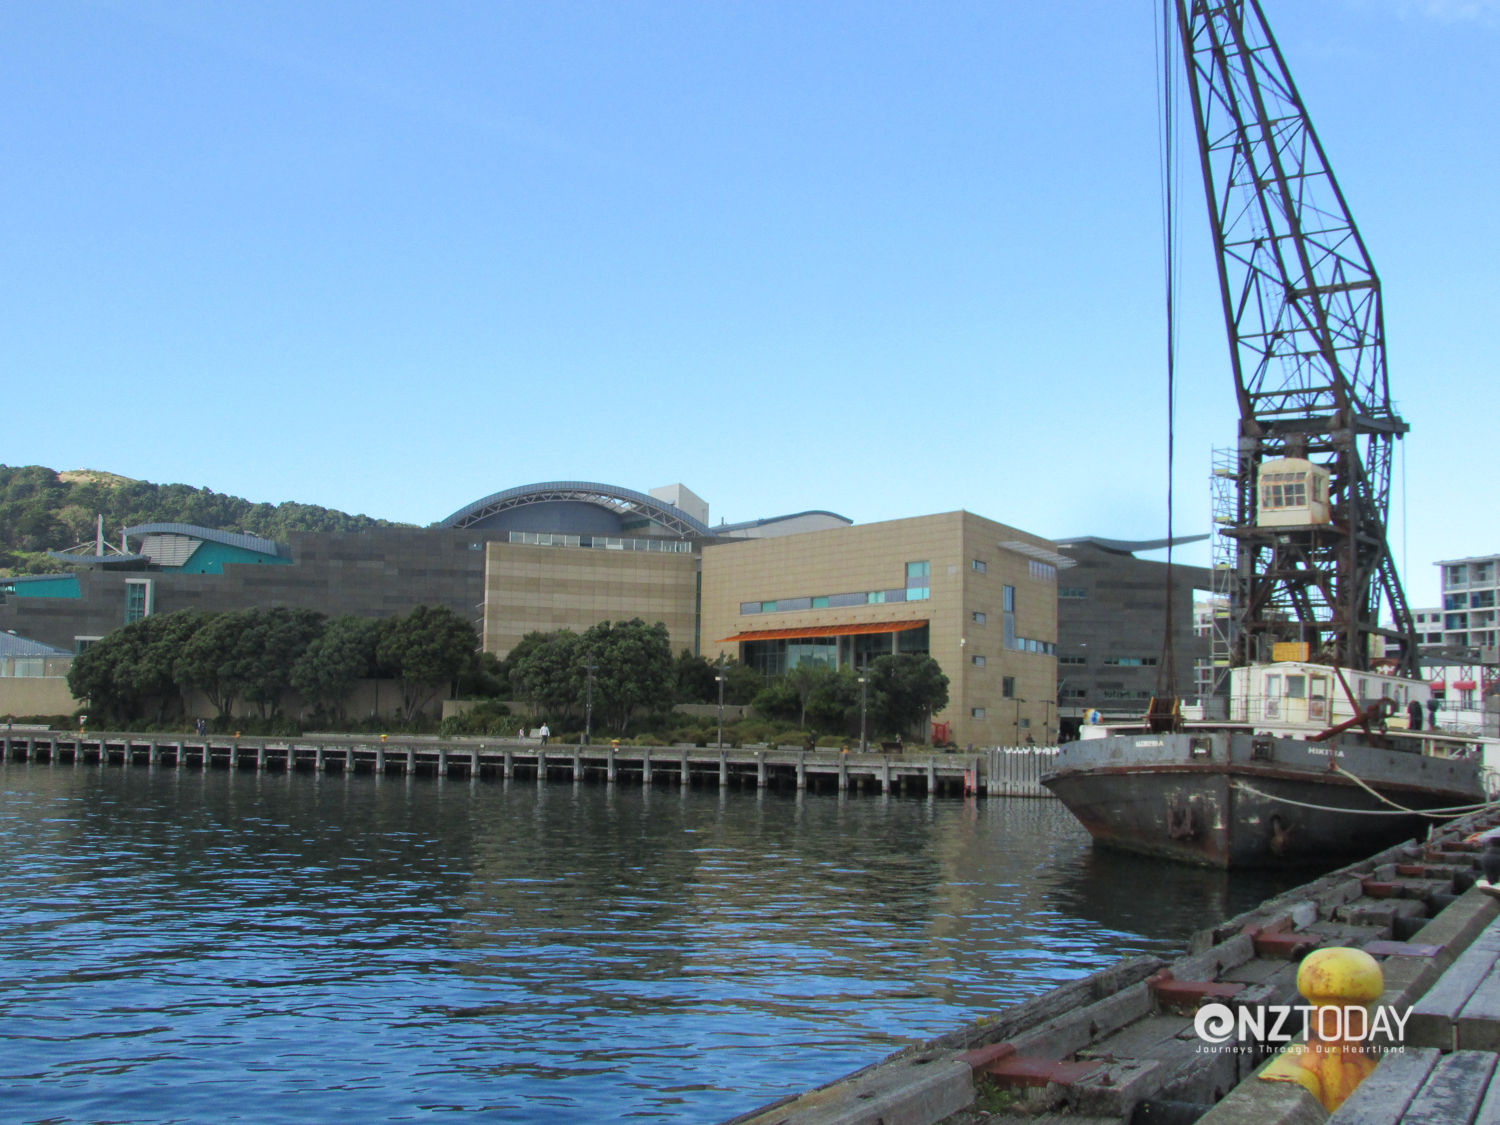 Te Papa sits on the Wellington waterfront near the heart of the city